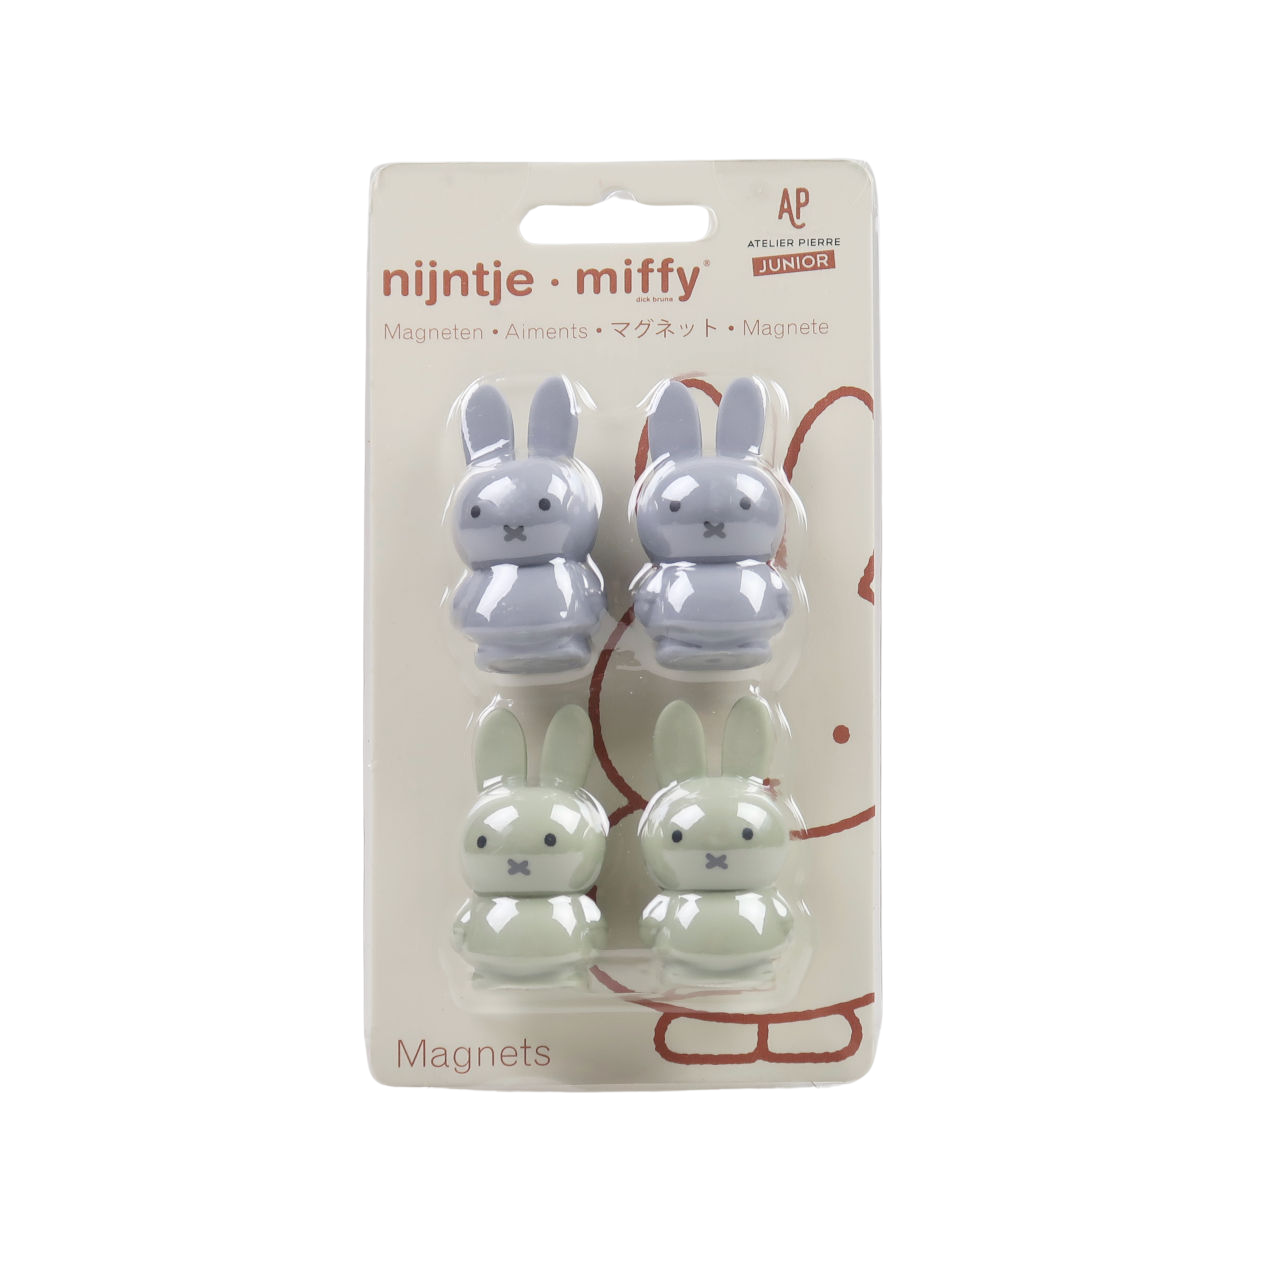 miffy-miffy-set-of-4-magnets-grey-and-green